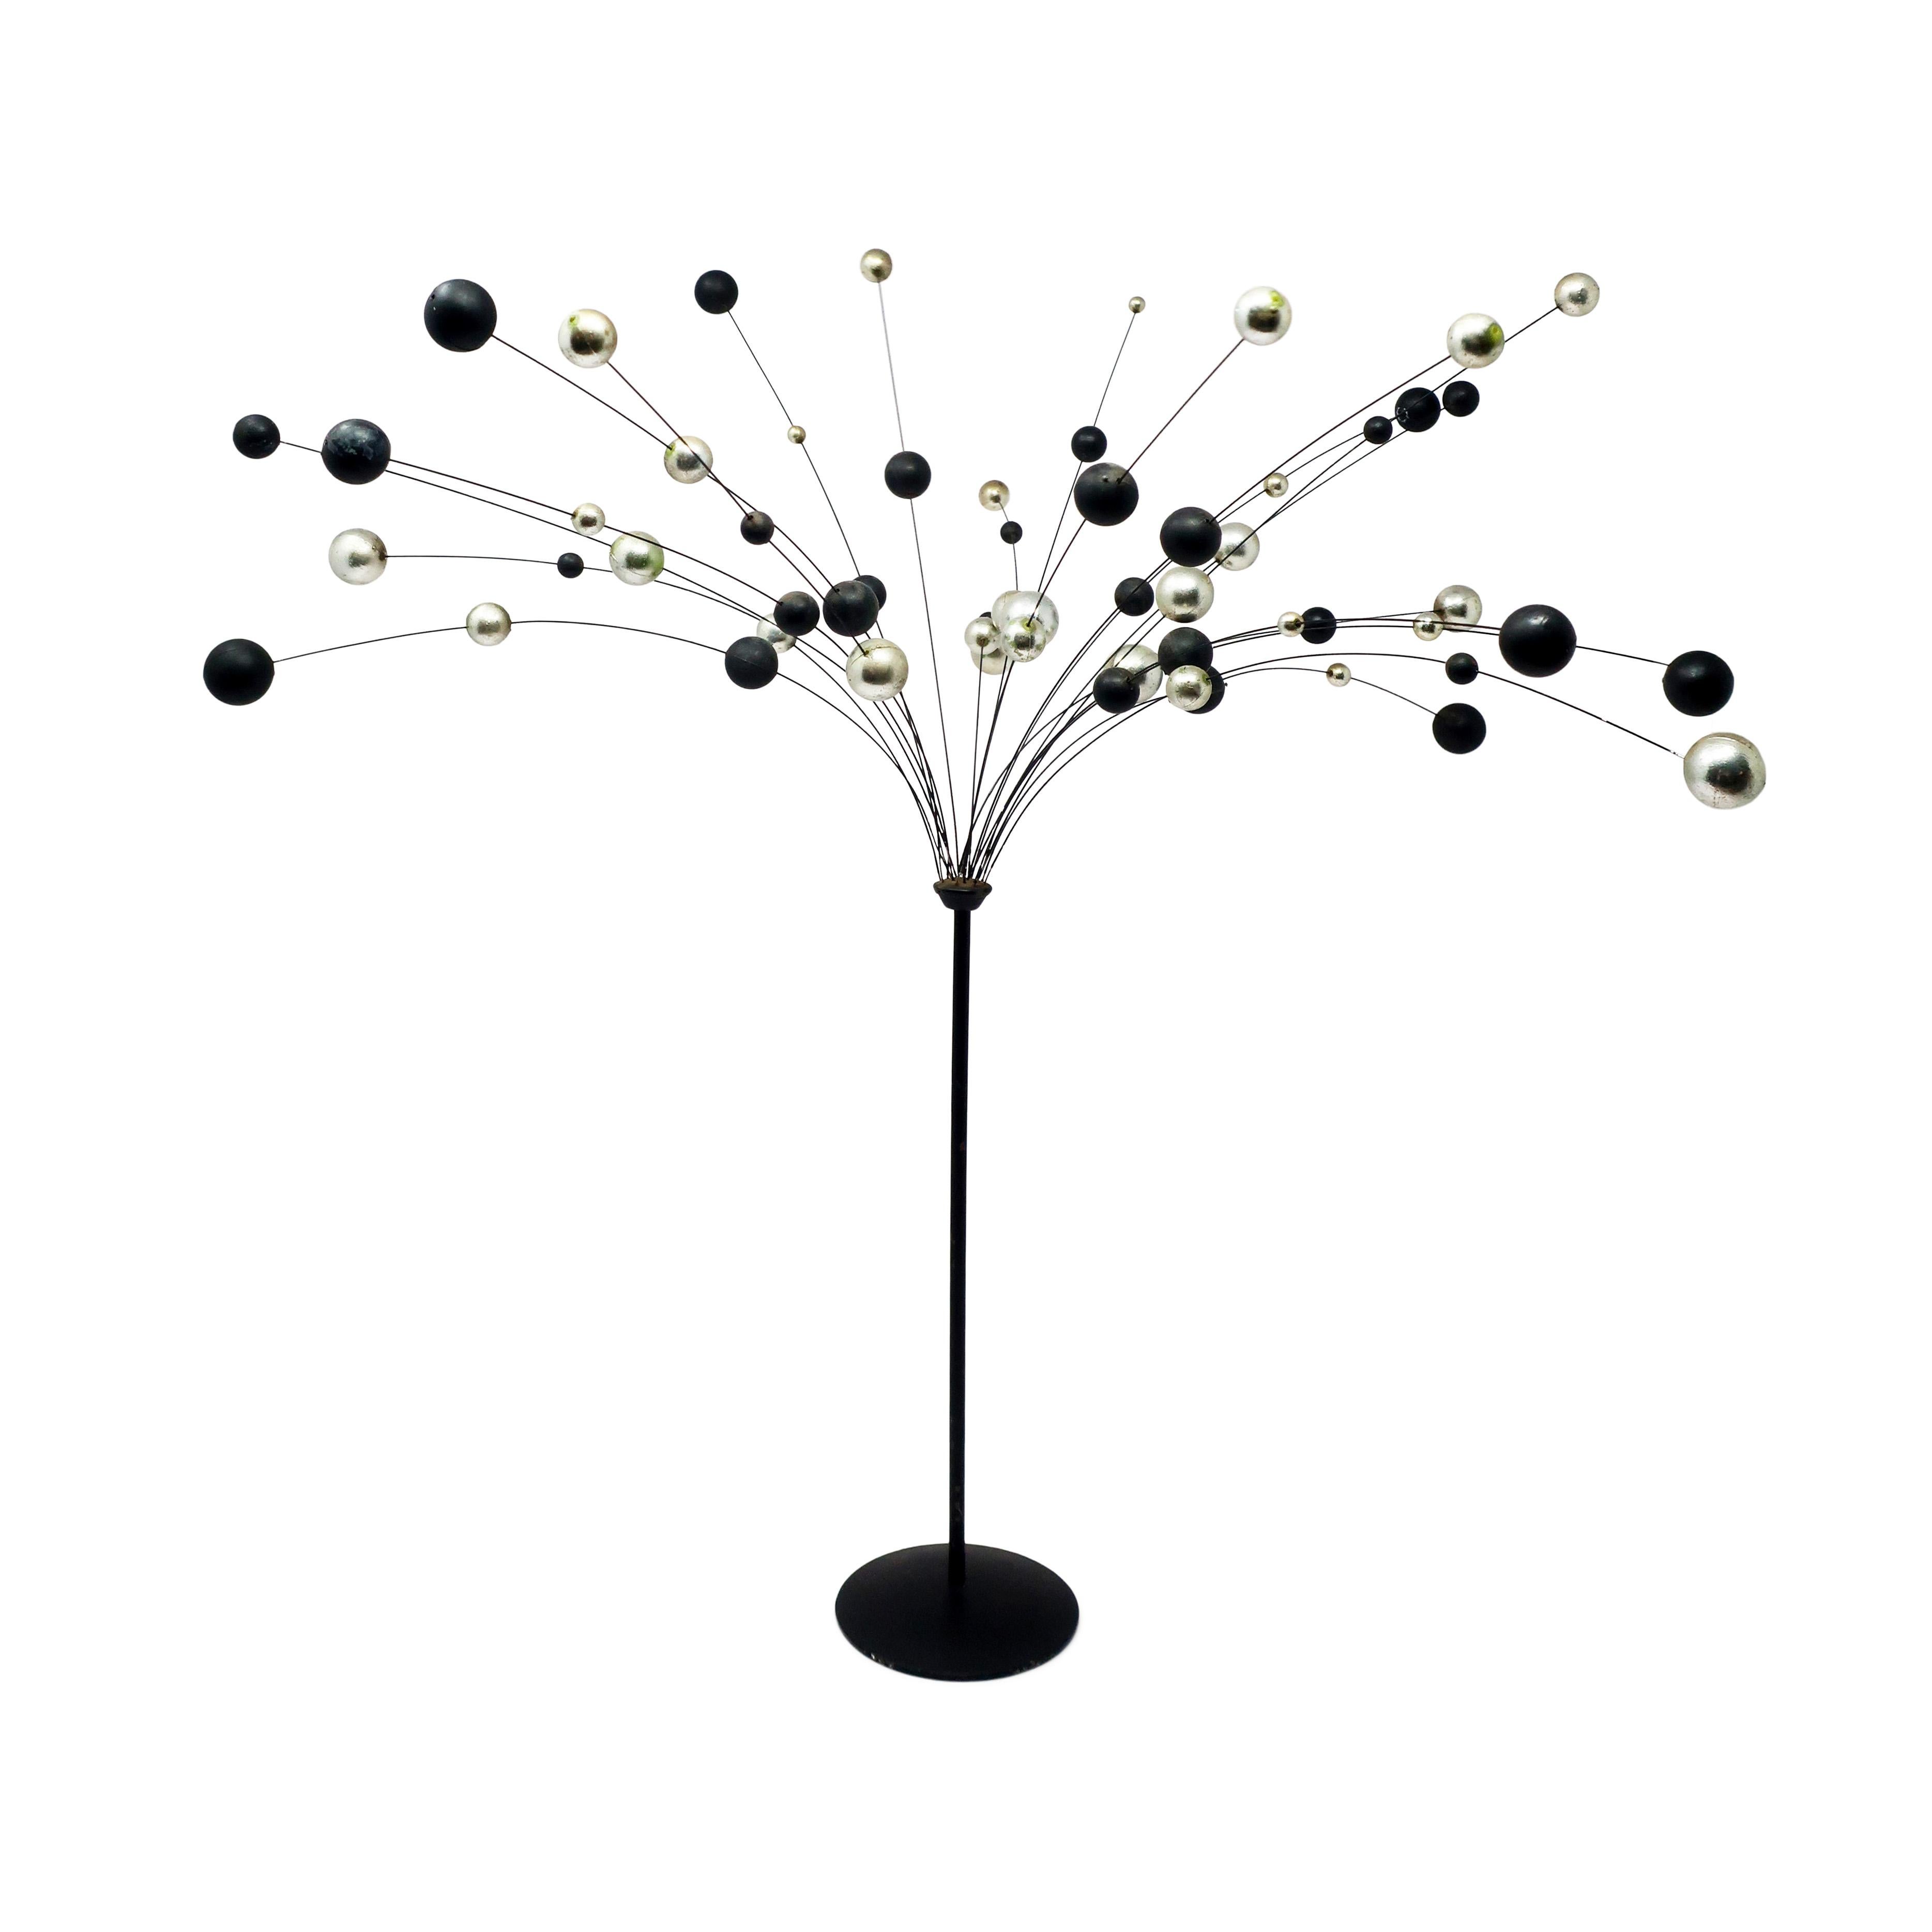 A vintage kinetic ball sculpture in the style of Laurids Lonborg, a Danish housewares and decorative objects powerhouse. Black metal base and stem, silver metal wires, and silver and black colored balls that gently sway with any movement, giving it